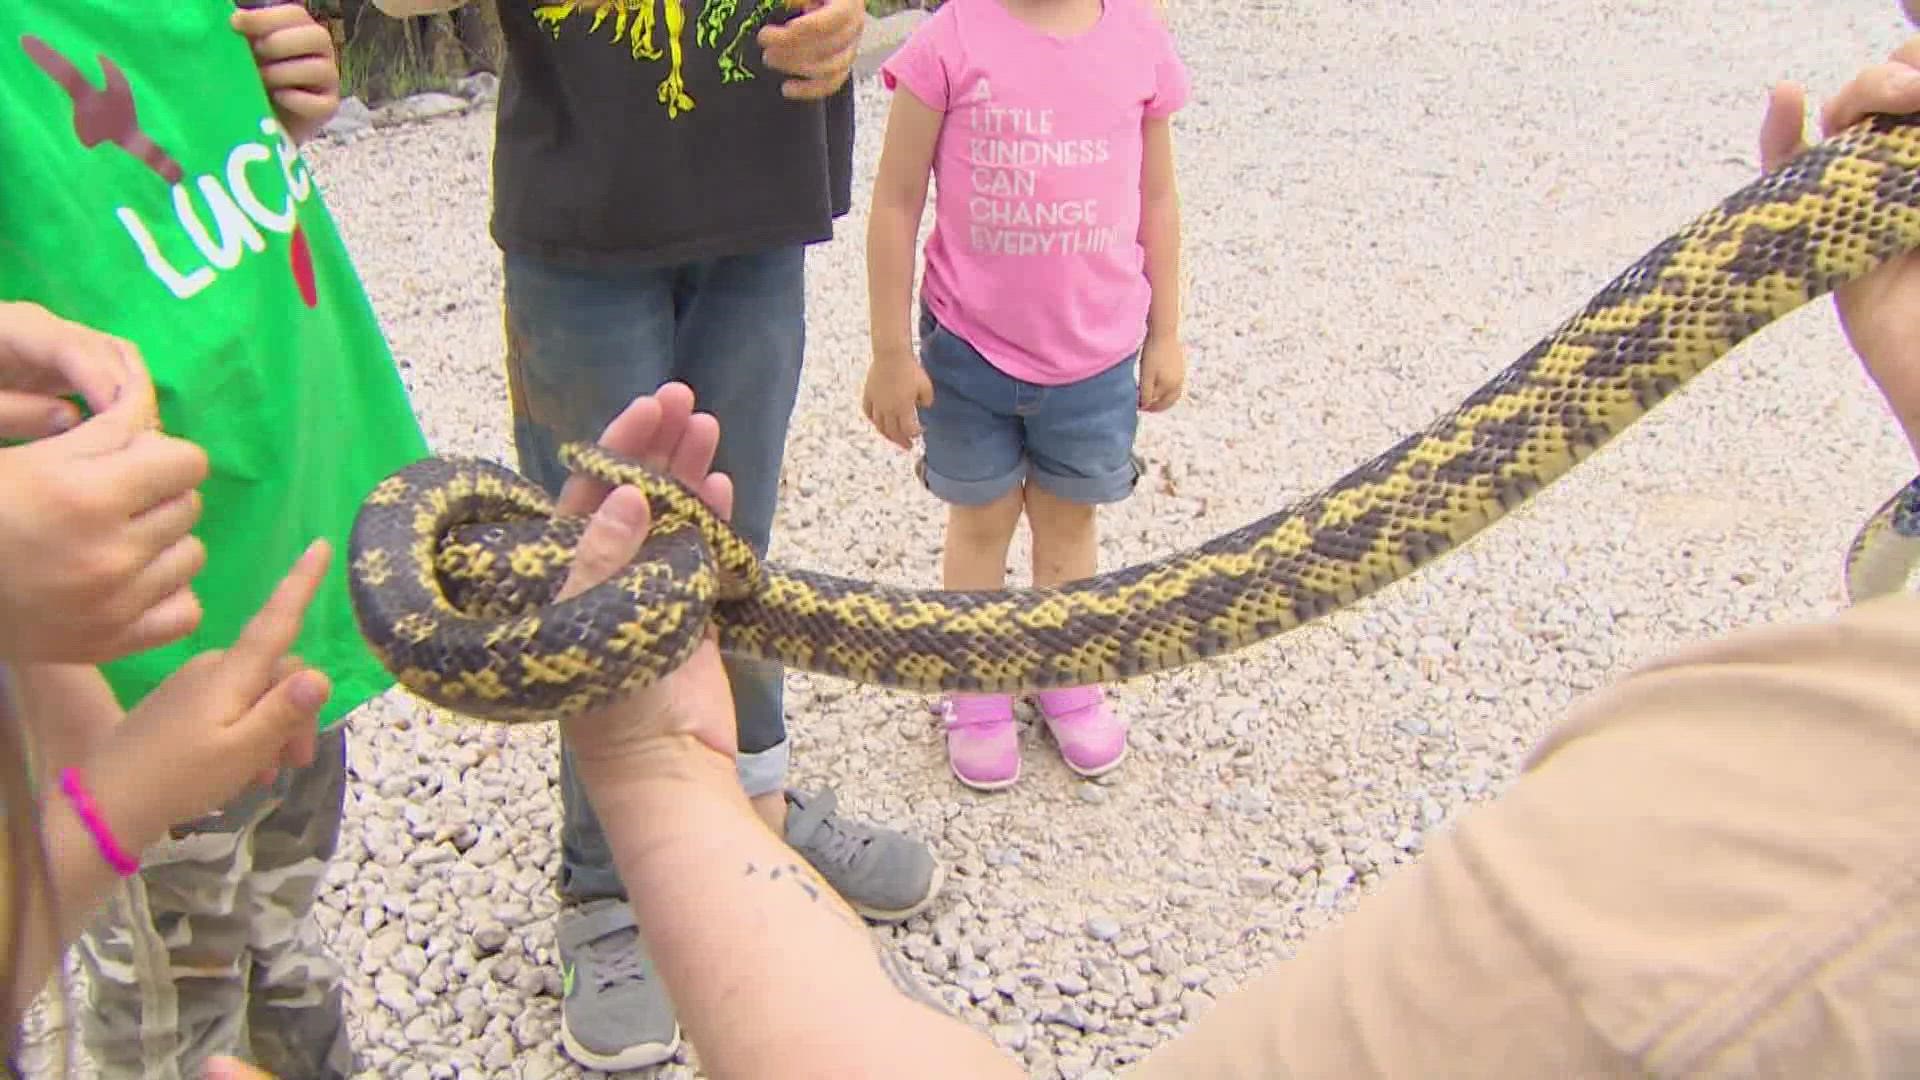 Wildlife expert Brandi Nickerson says Texans can expect to have more snake encounters as the temperatures start to heat up across the state.